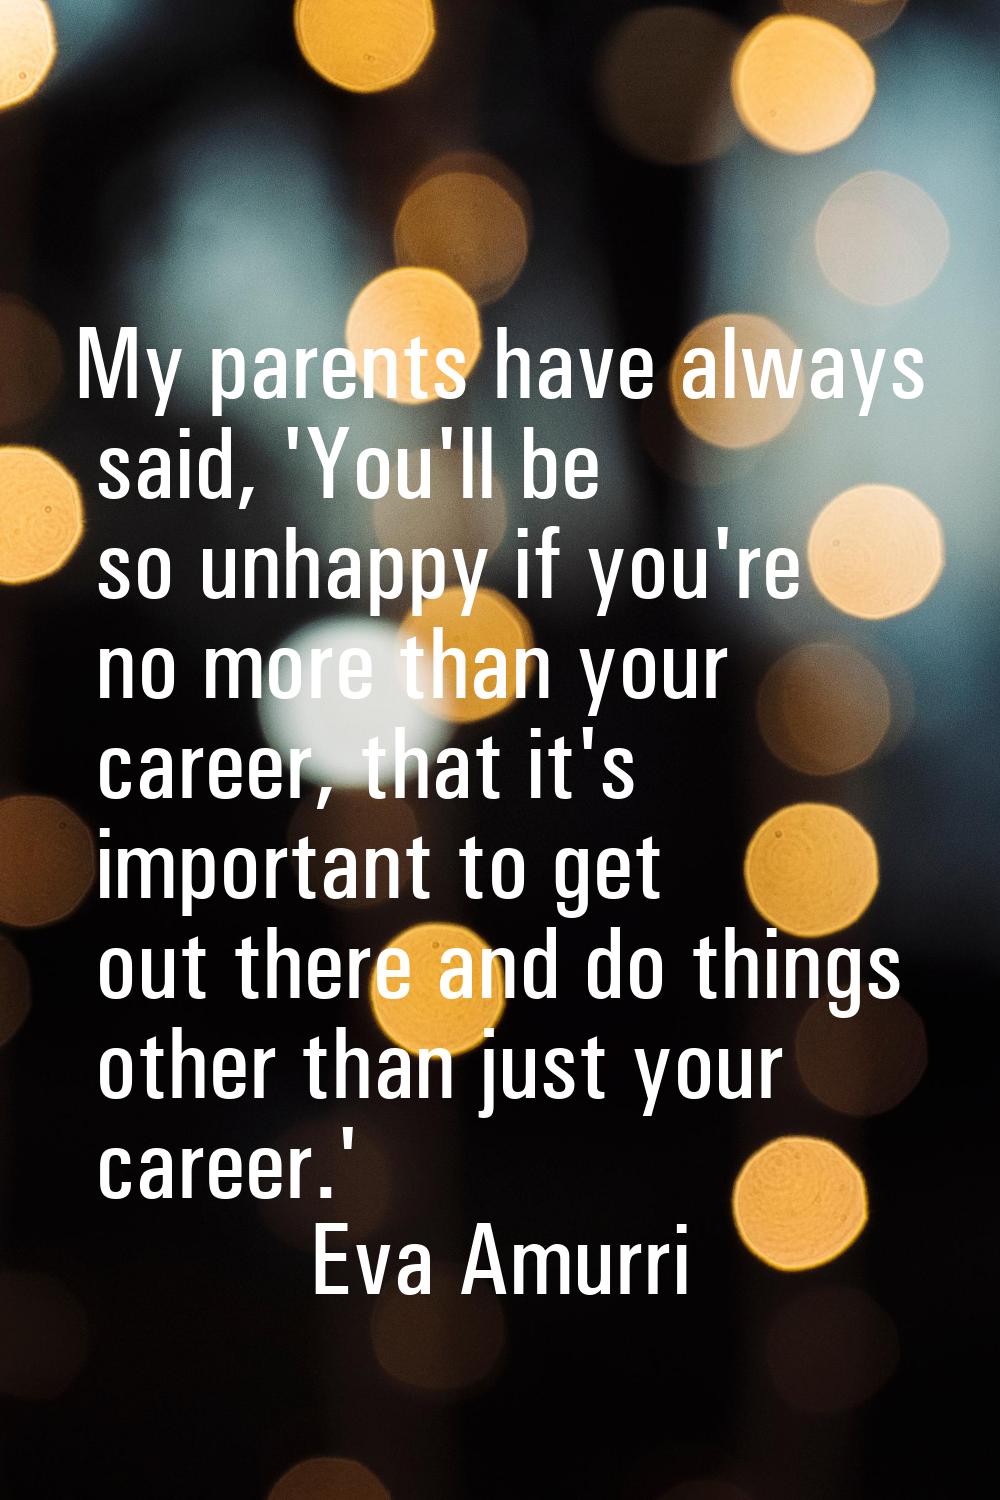 My parents have always said, 'You'll be so unhappy if you're no more than your career, that it's im